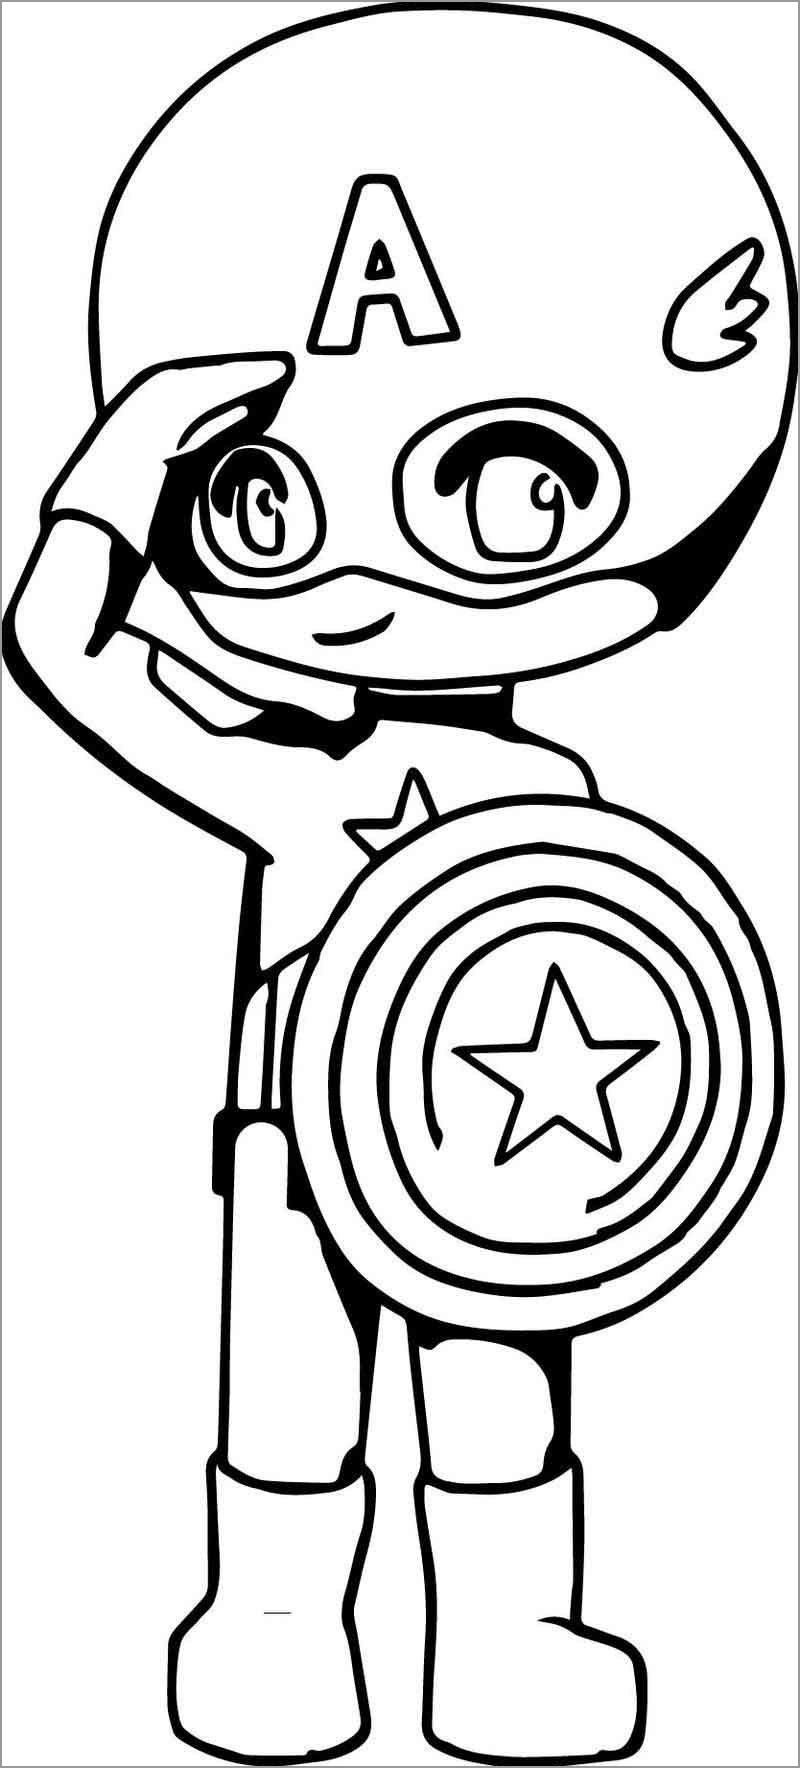 Chibi Captain America Coloring Page